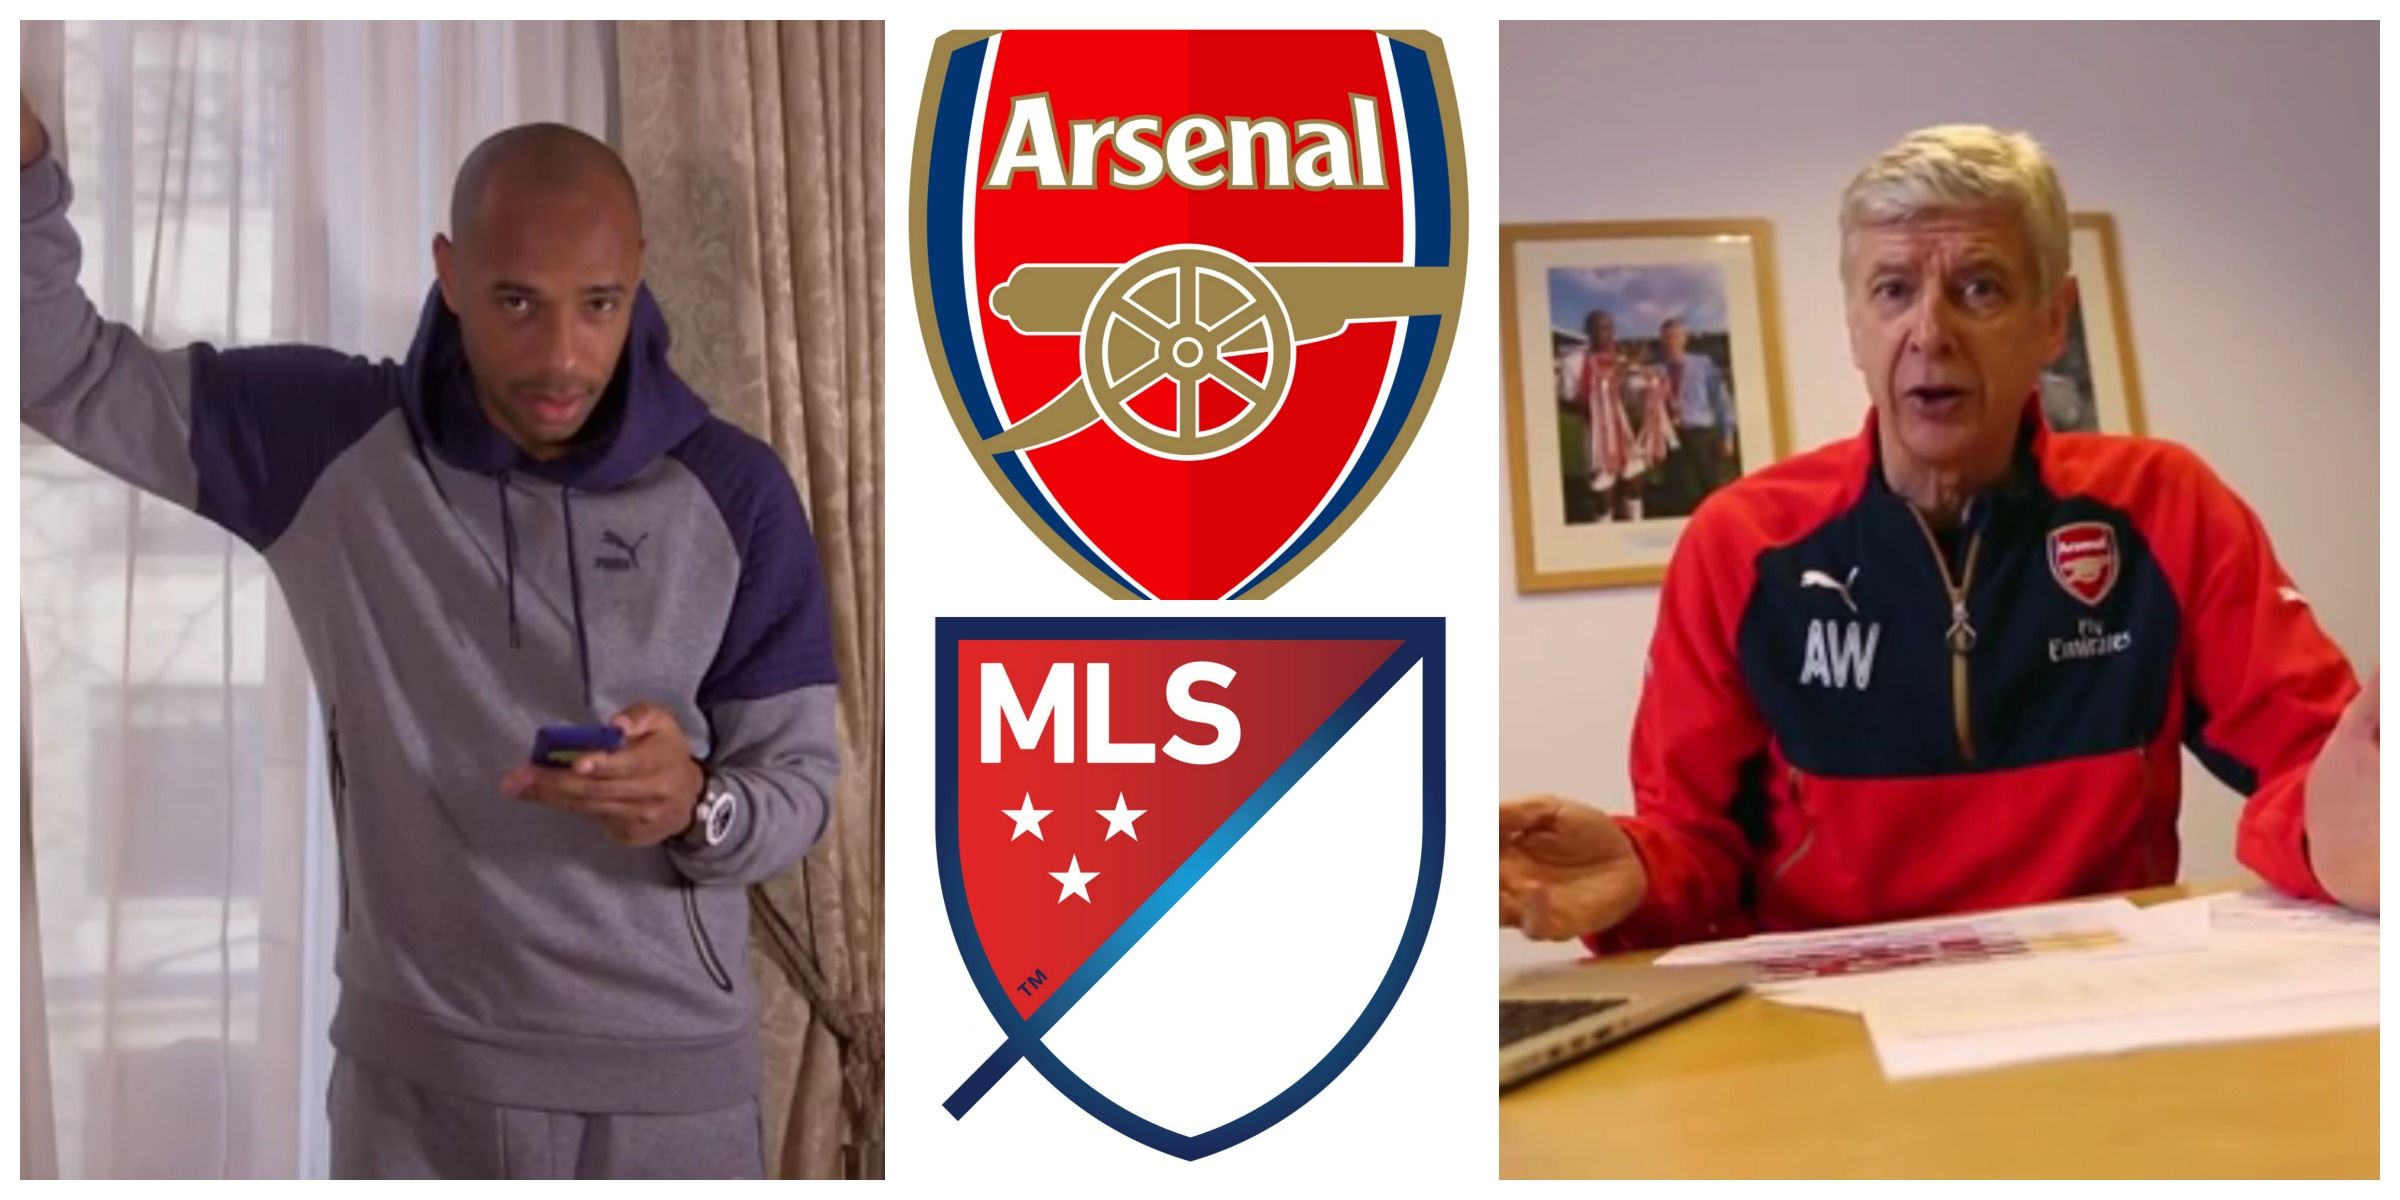 MLS announces Fan XI for 2016 AT&T MLS All-Star Game vs. Arsenal